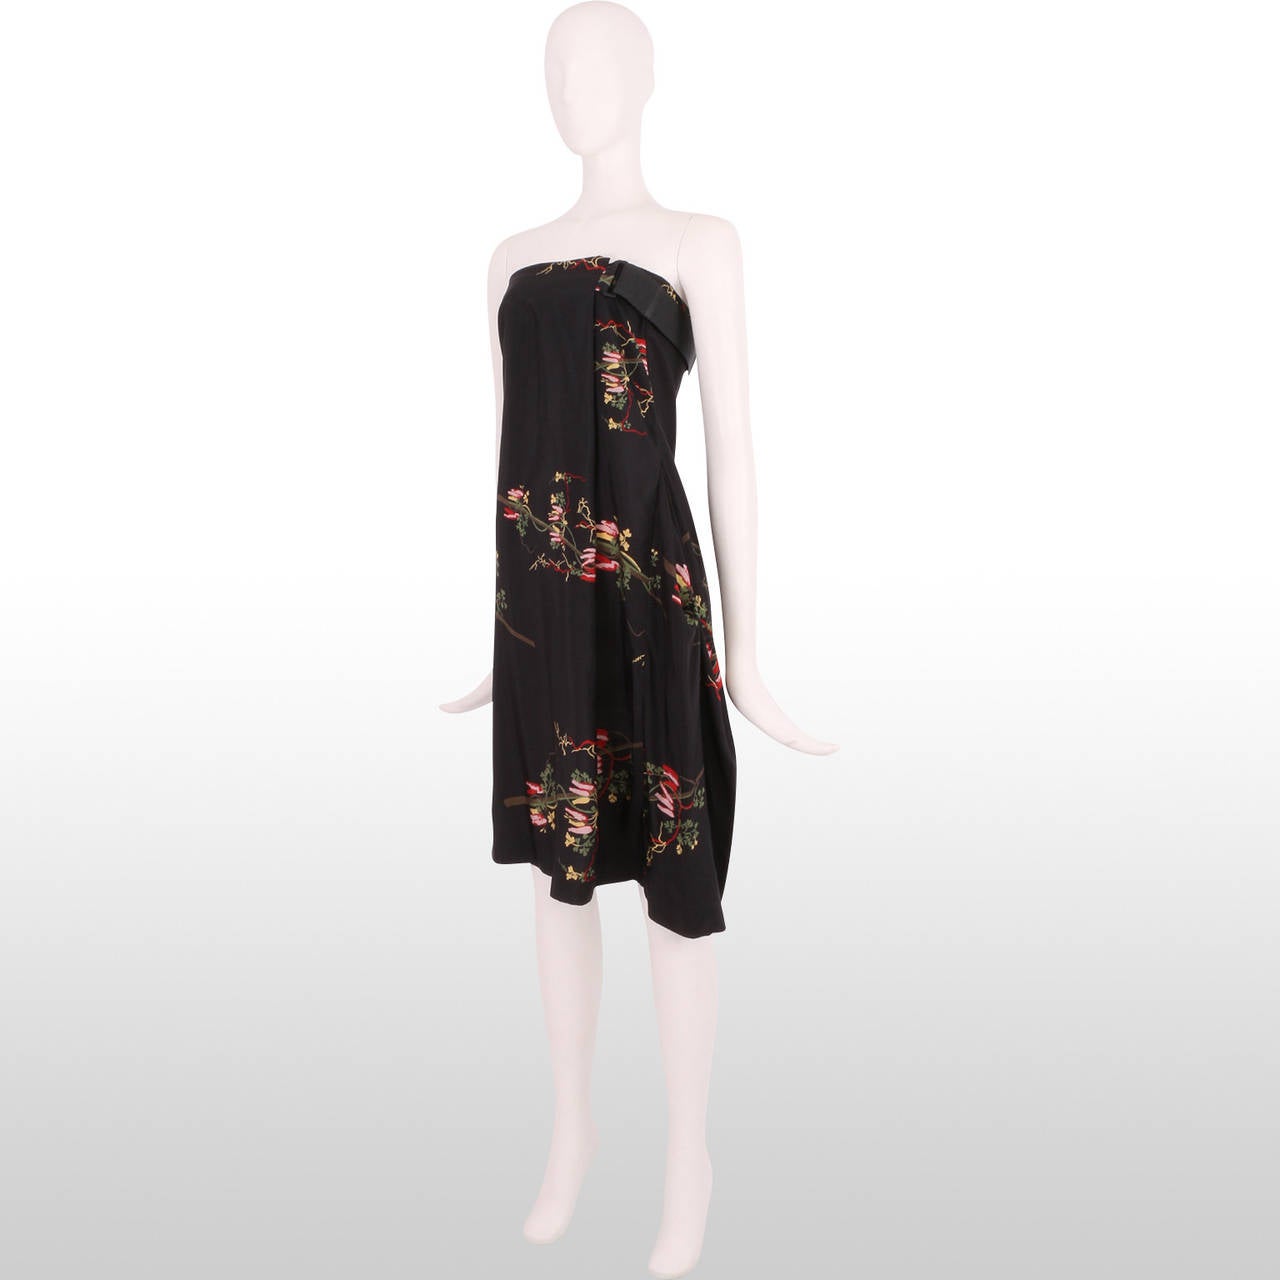 Vivienne Westwood Anglomania Black with Oriental Print Strapless Dress For Sale 1